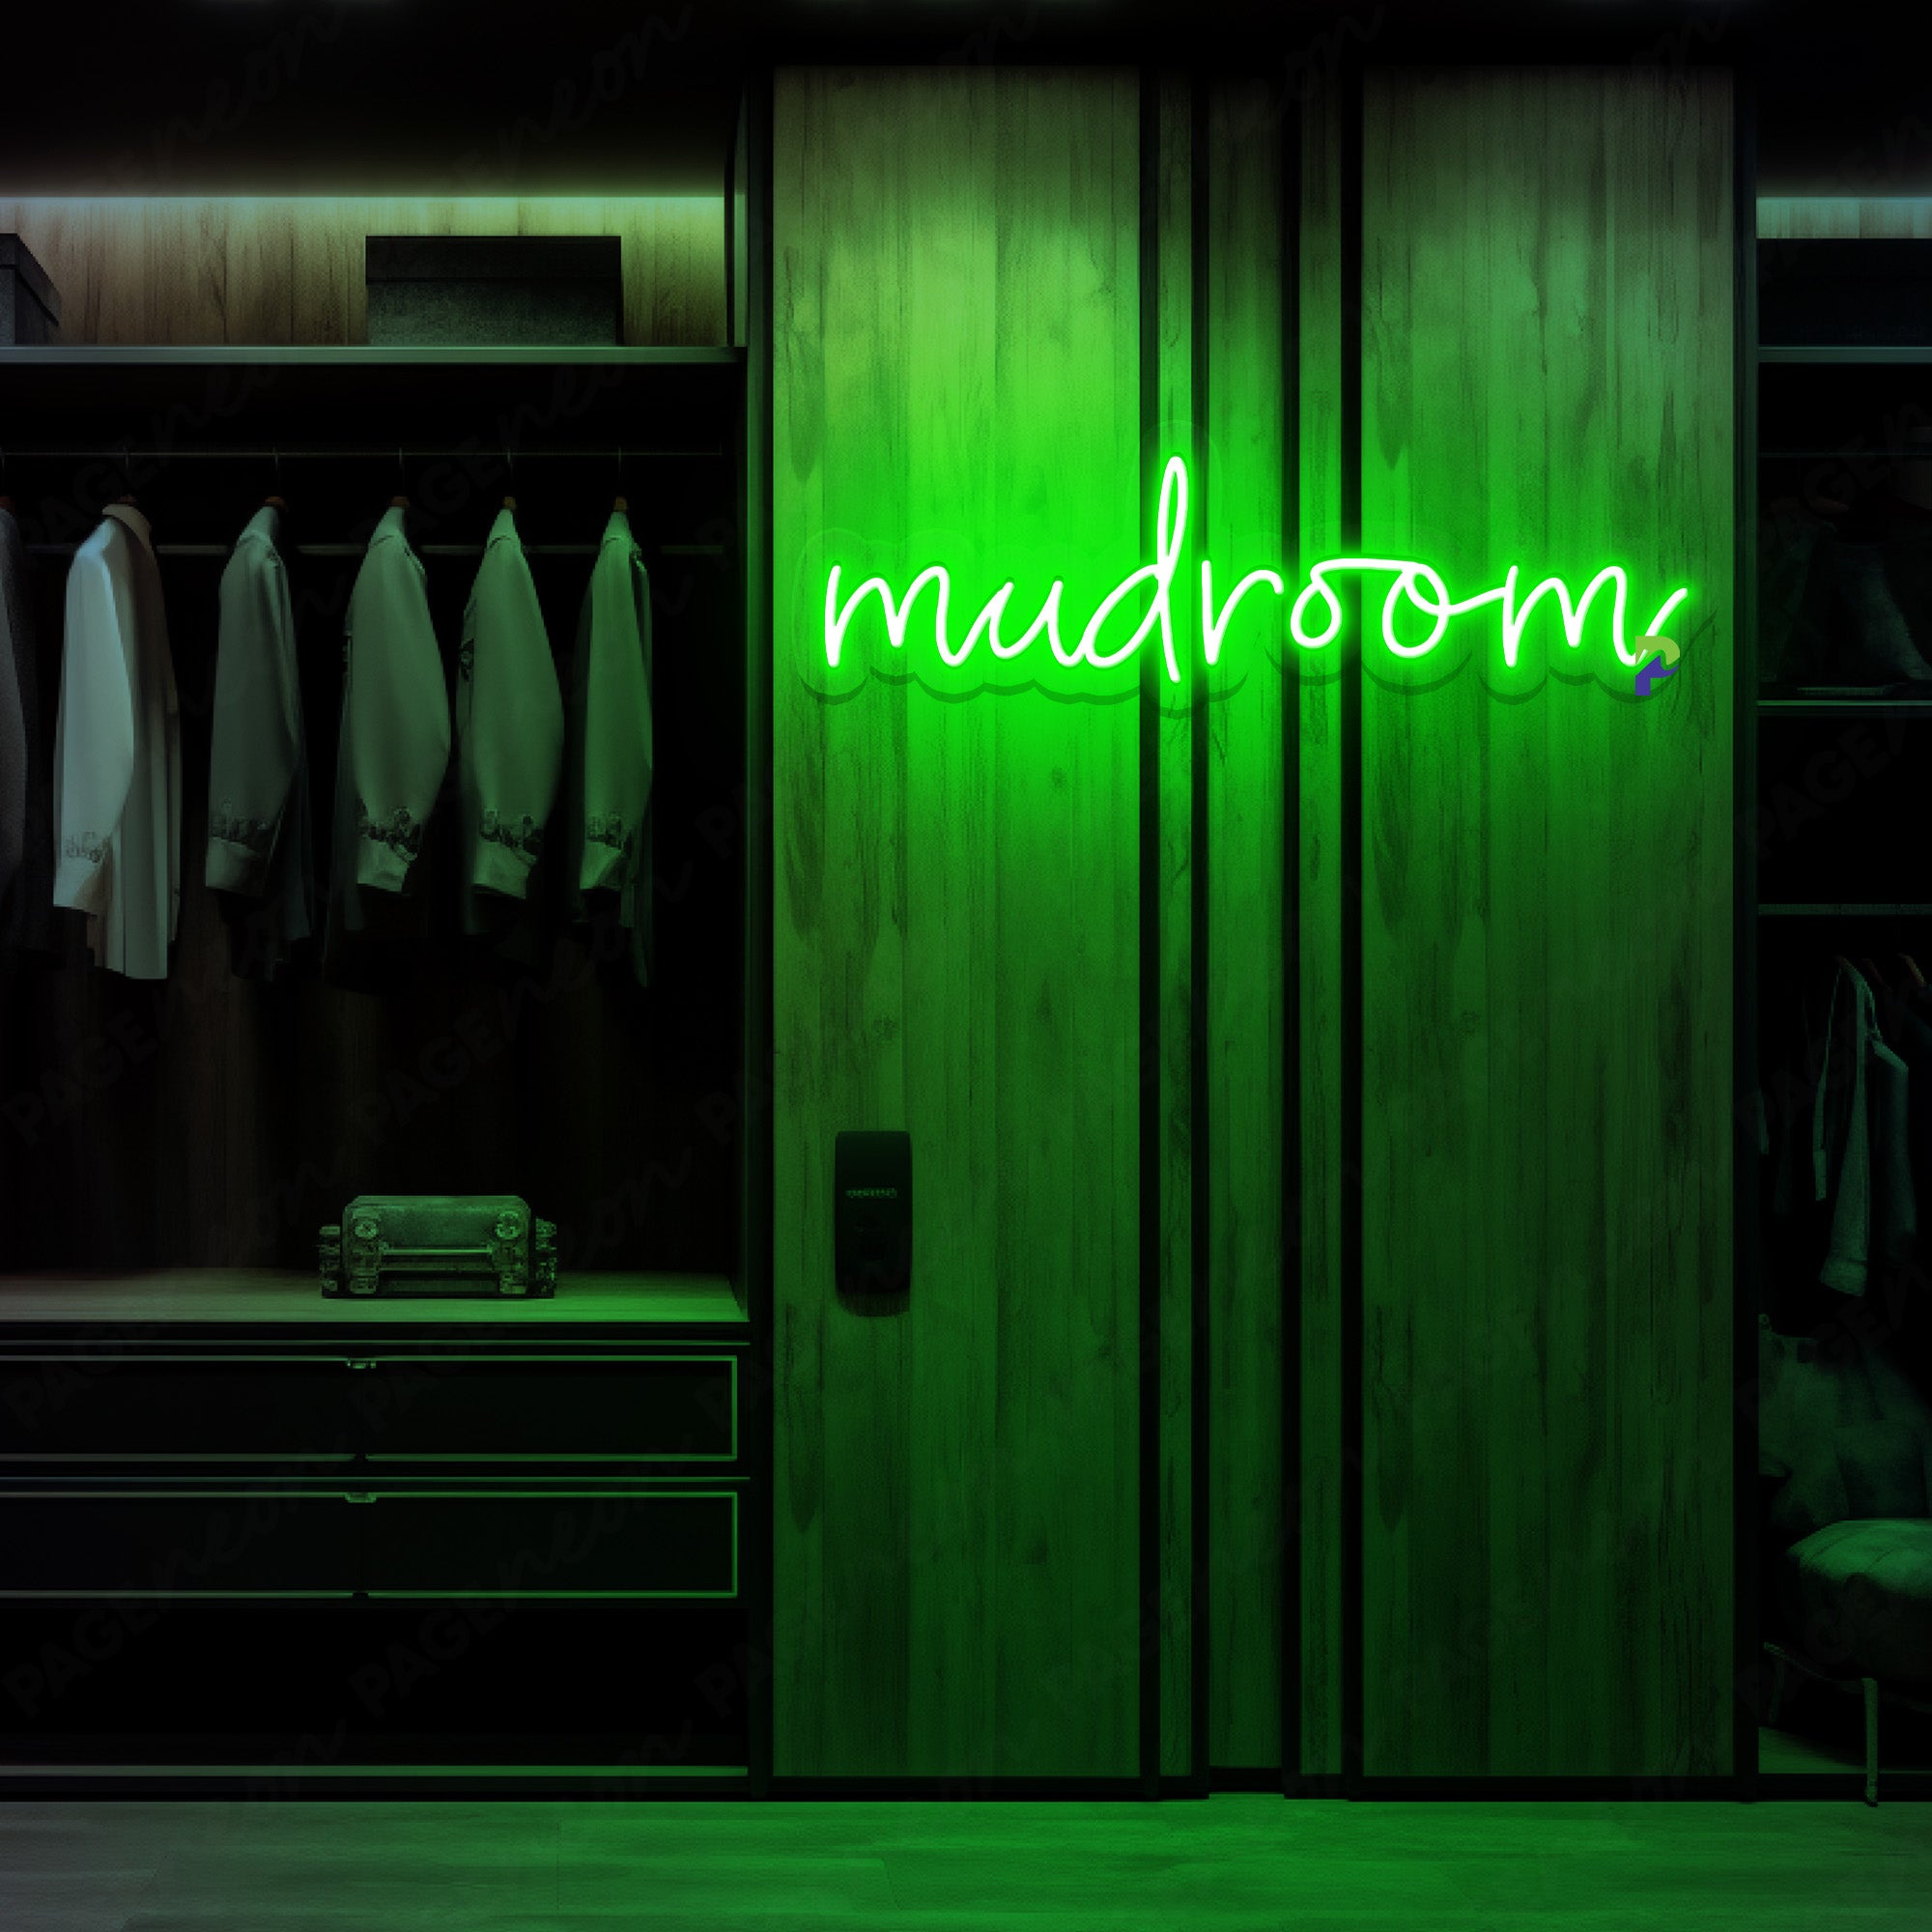 Mudroom Neon Sign Decoration Led Light For Home